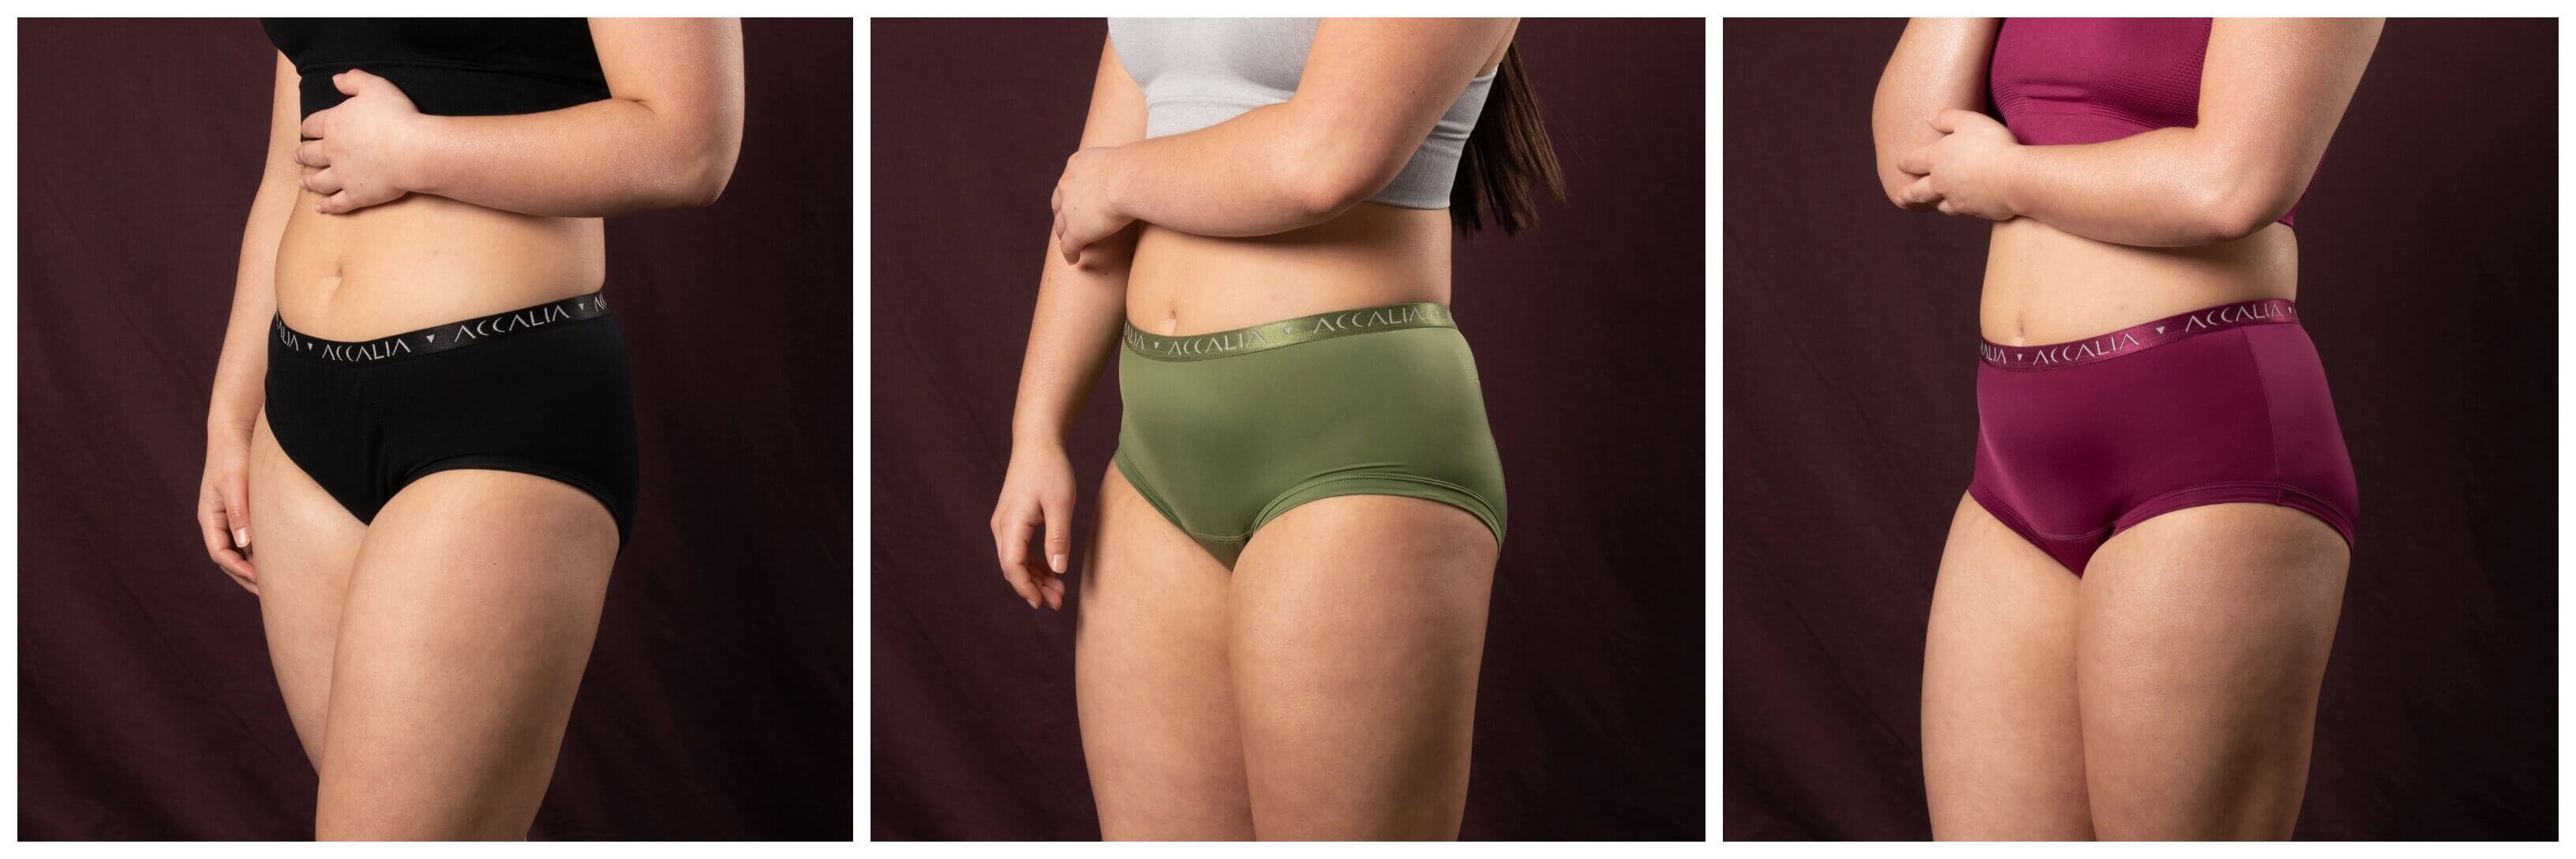 Best Women's Underwear for Pads - Incontinence or Period | Zorbies